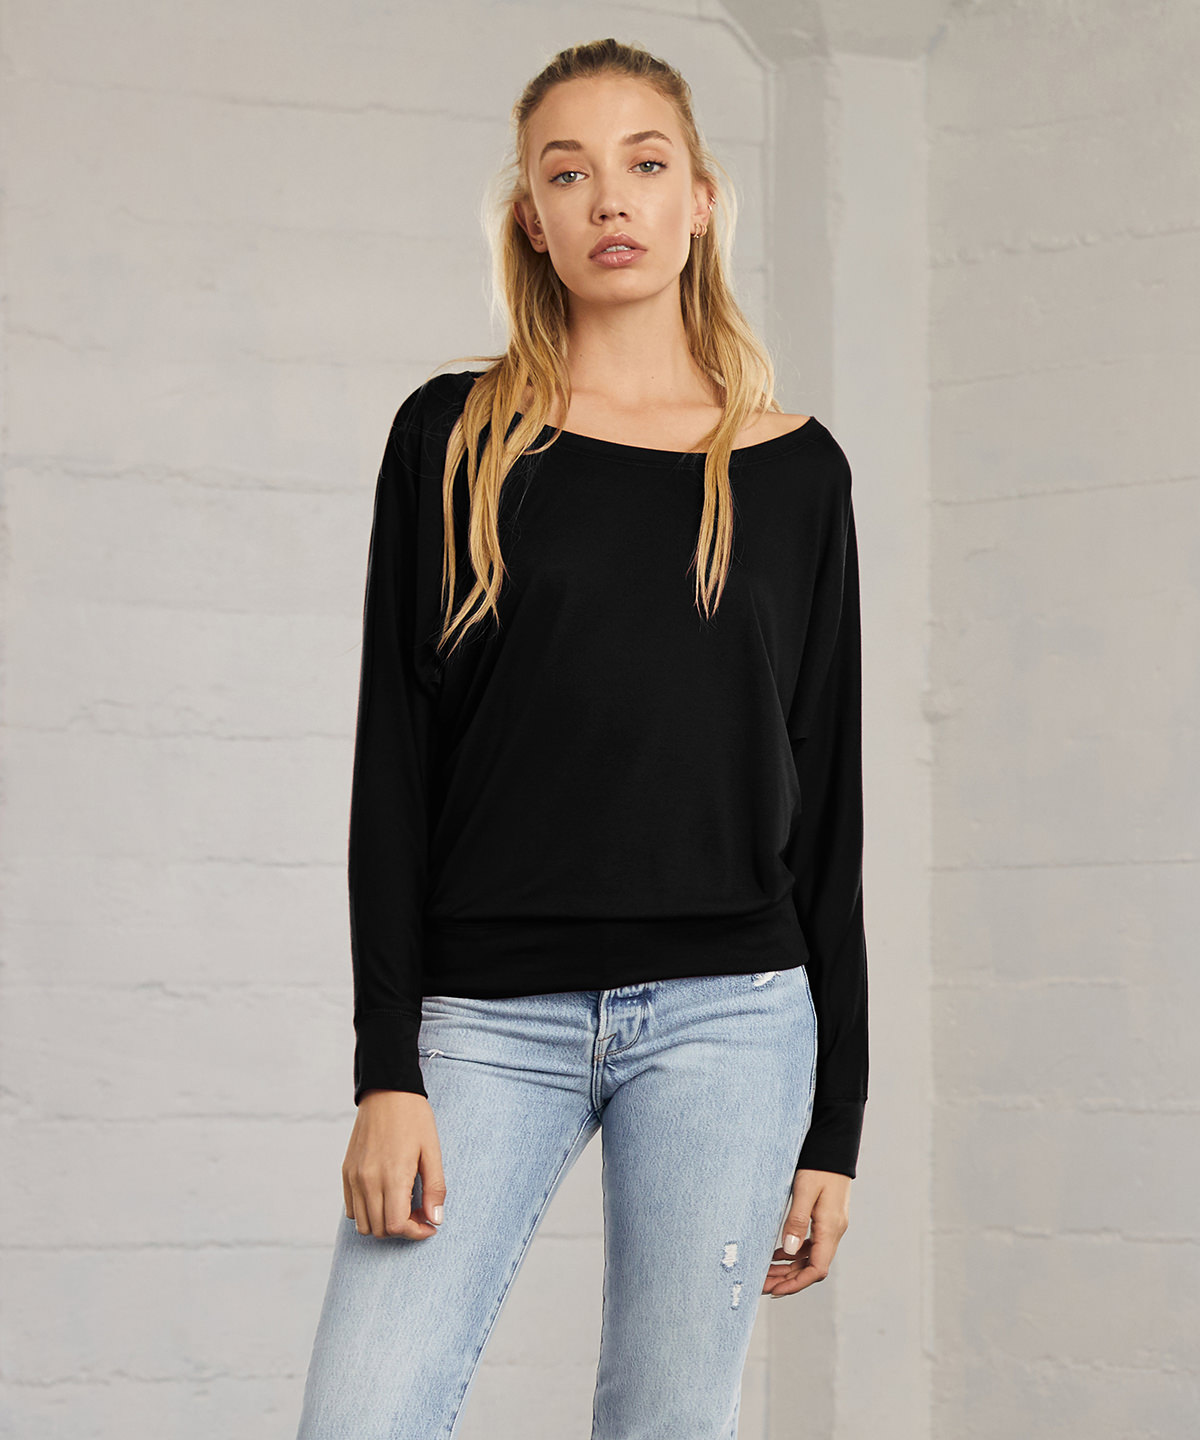 Flowy off-the-shoulder long sleeve t-shirt